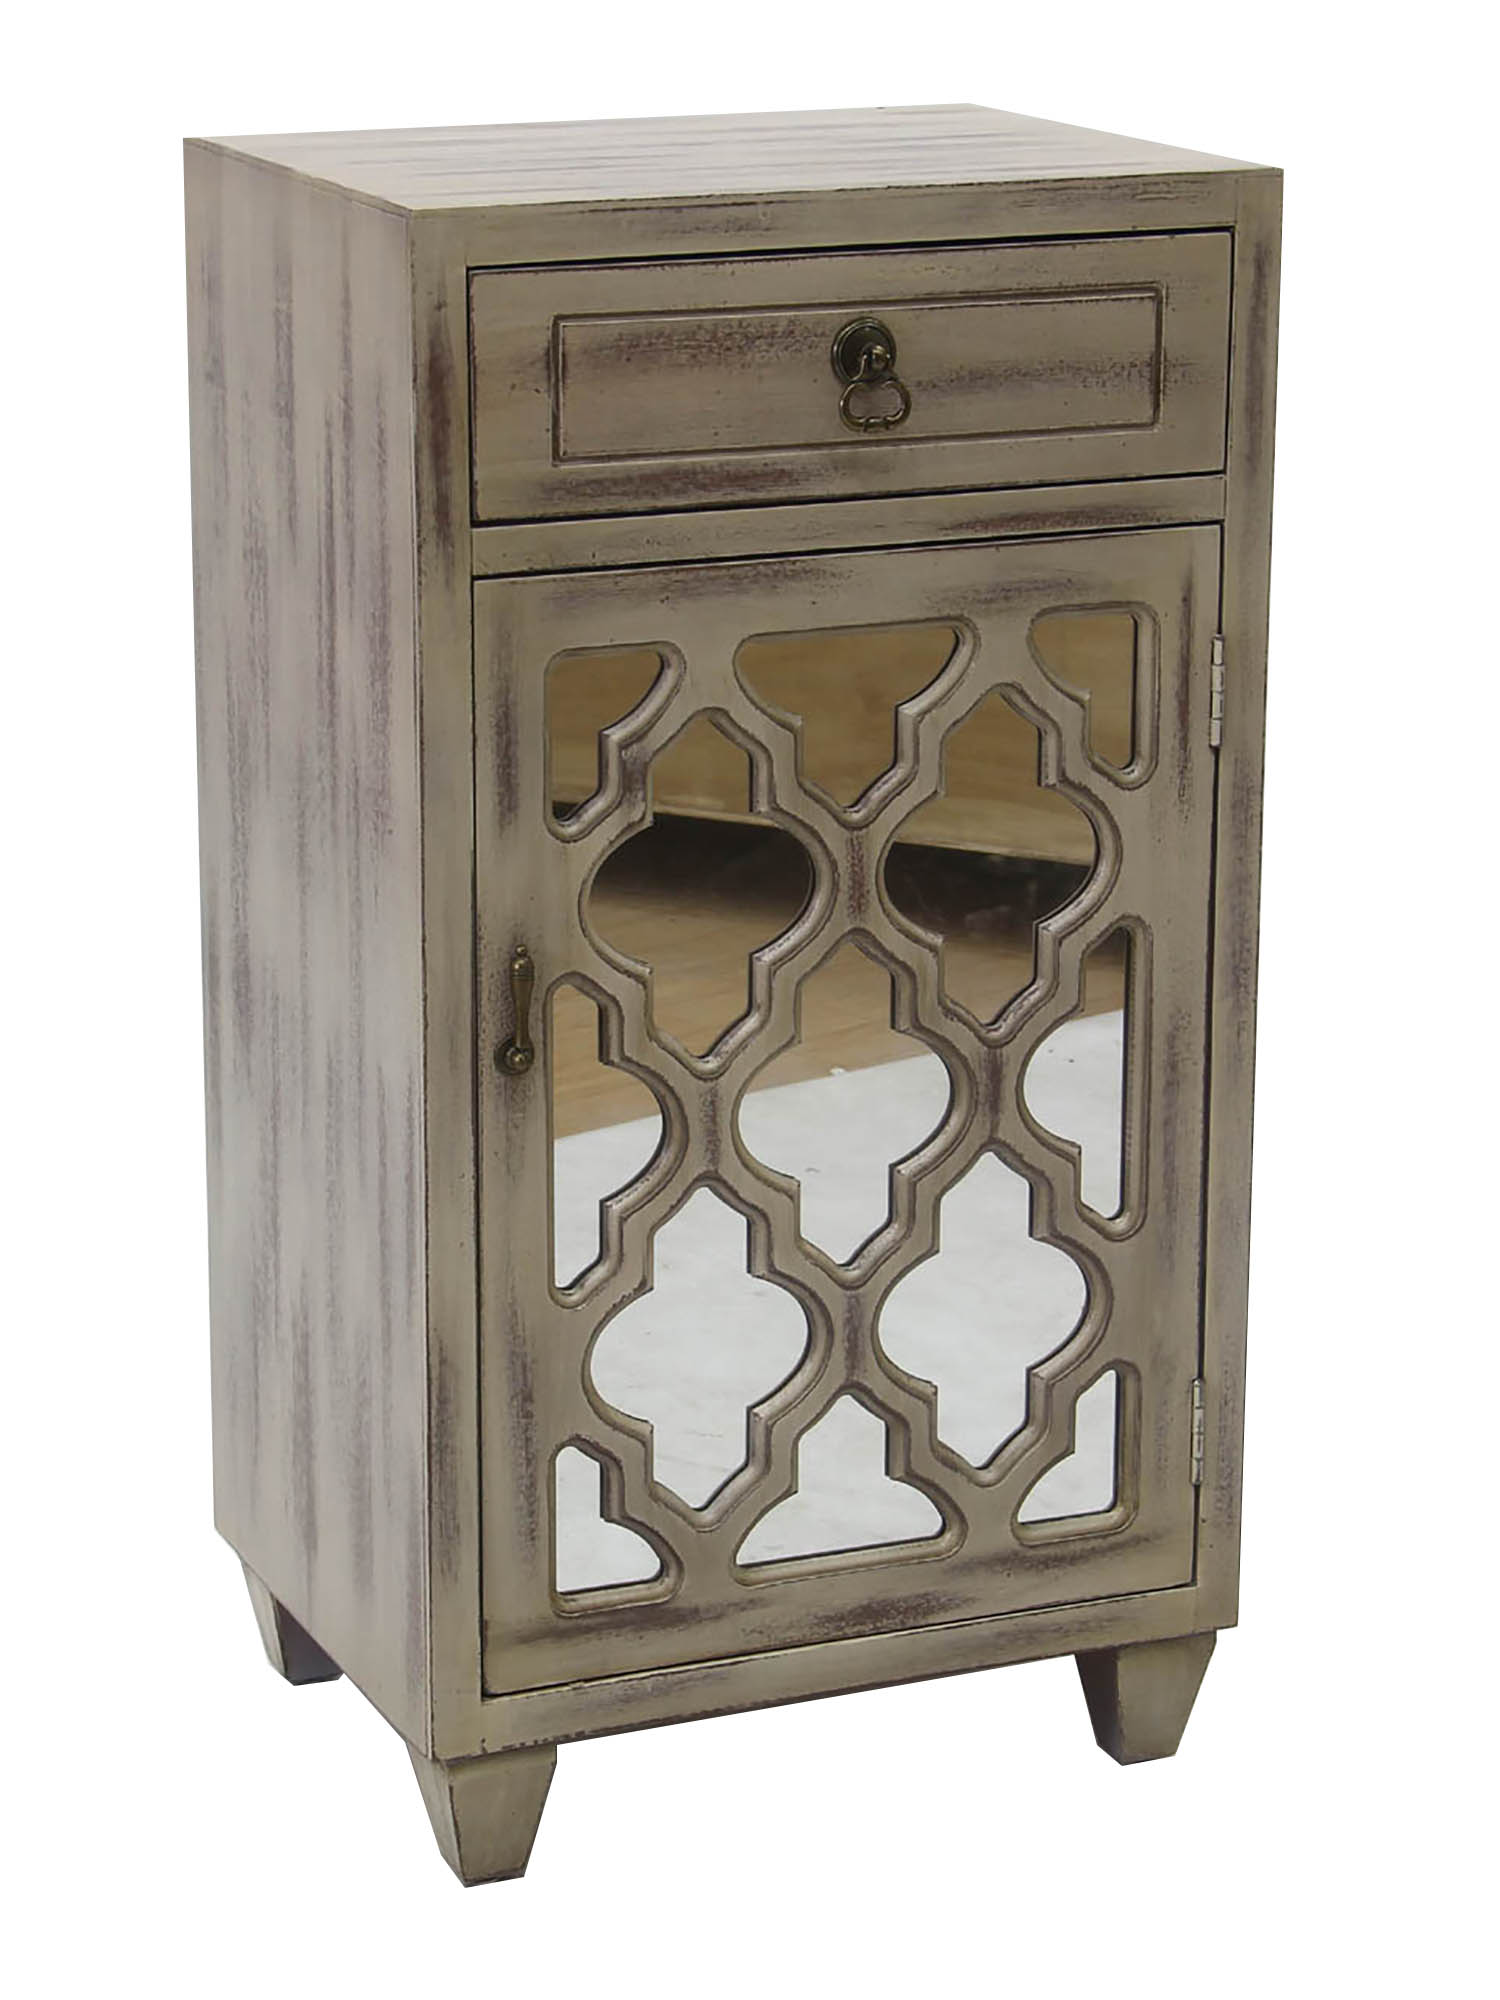 16.75" X 12.75" X 30.75" Taupe Wash MDF Wood Mirrored Glass Cabinet with a Drawer and a Door